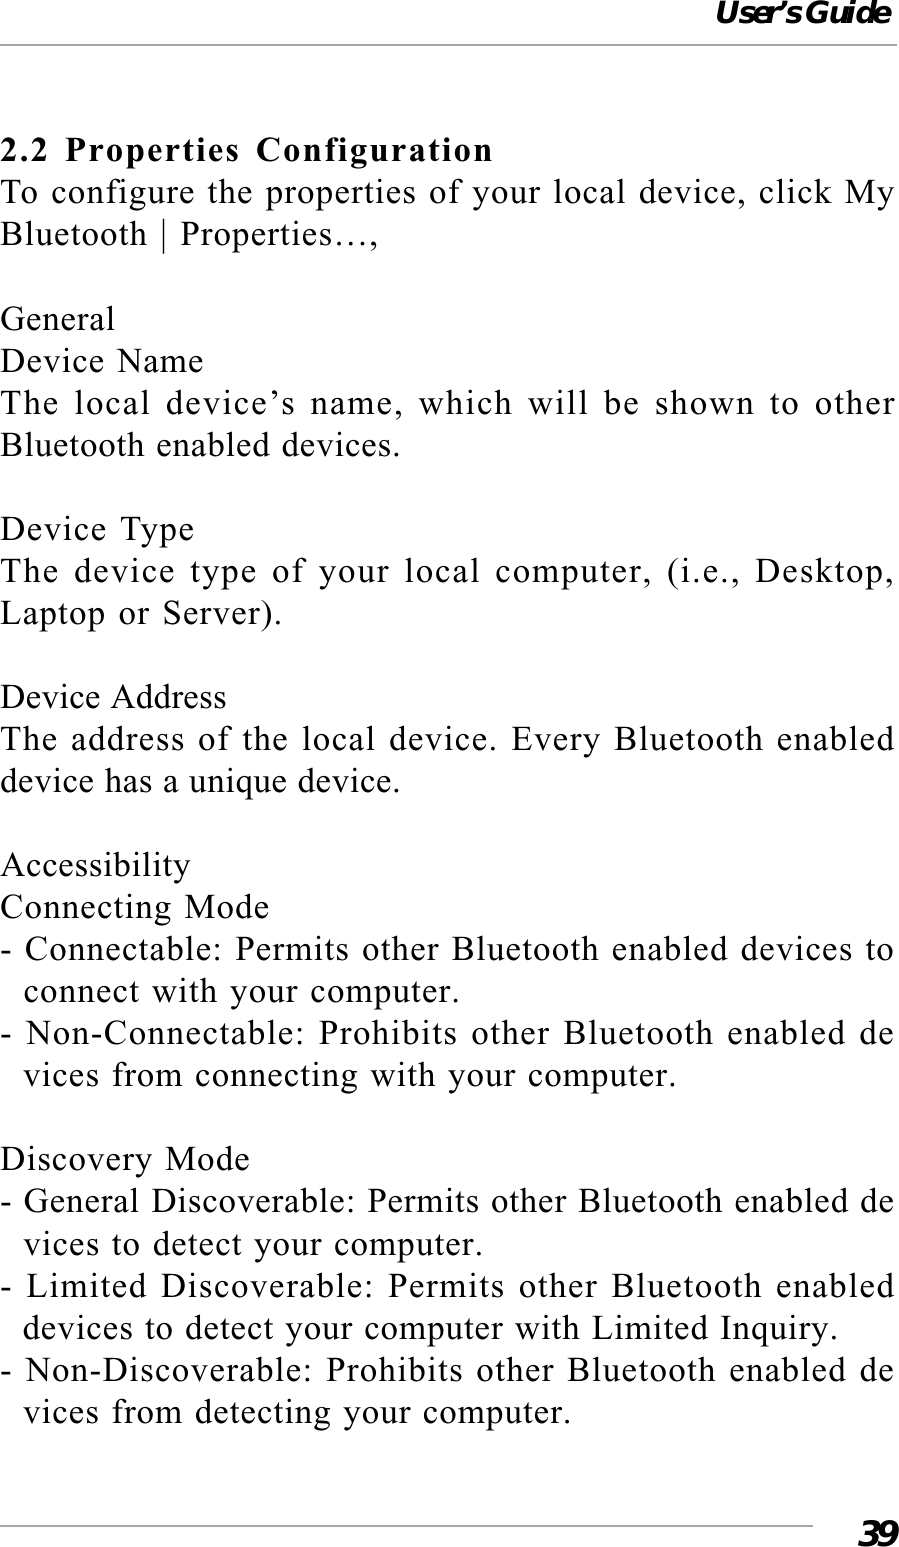 User’s Guide392.2 Properties ConfigurationTo configure the properties of your local device, click MyBluetooth | Properties…,GeneralDevice NameThe local device’s name, which will be shown to otherBluetooth enabled devices.Device TypeThe device type of your local computer, (i.e., Desktop,Laptop or Server).Device AddressThe address of the local device. Every Bluetooth enableddevice has a unique device.AccessibilityConnecting Mode- Connectable: Permits other Bluetooth enabled devices to  connect with your computer.- Non-Connectable: Prohibits other Bluetooth enabled de  vices from connecting with your computer.Discovery Mode- General Discoverable: Permits other Bluetooth enabled de  vices to detect your computer.- Limited Discoverable: Permits other Bluetooth enabled  devices to detect your computer with Limited Inquiry.- Non-Discoverable: Prohibits other Bluetooth enabled de  vices from detecting your computer.